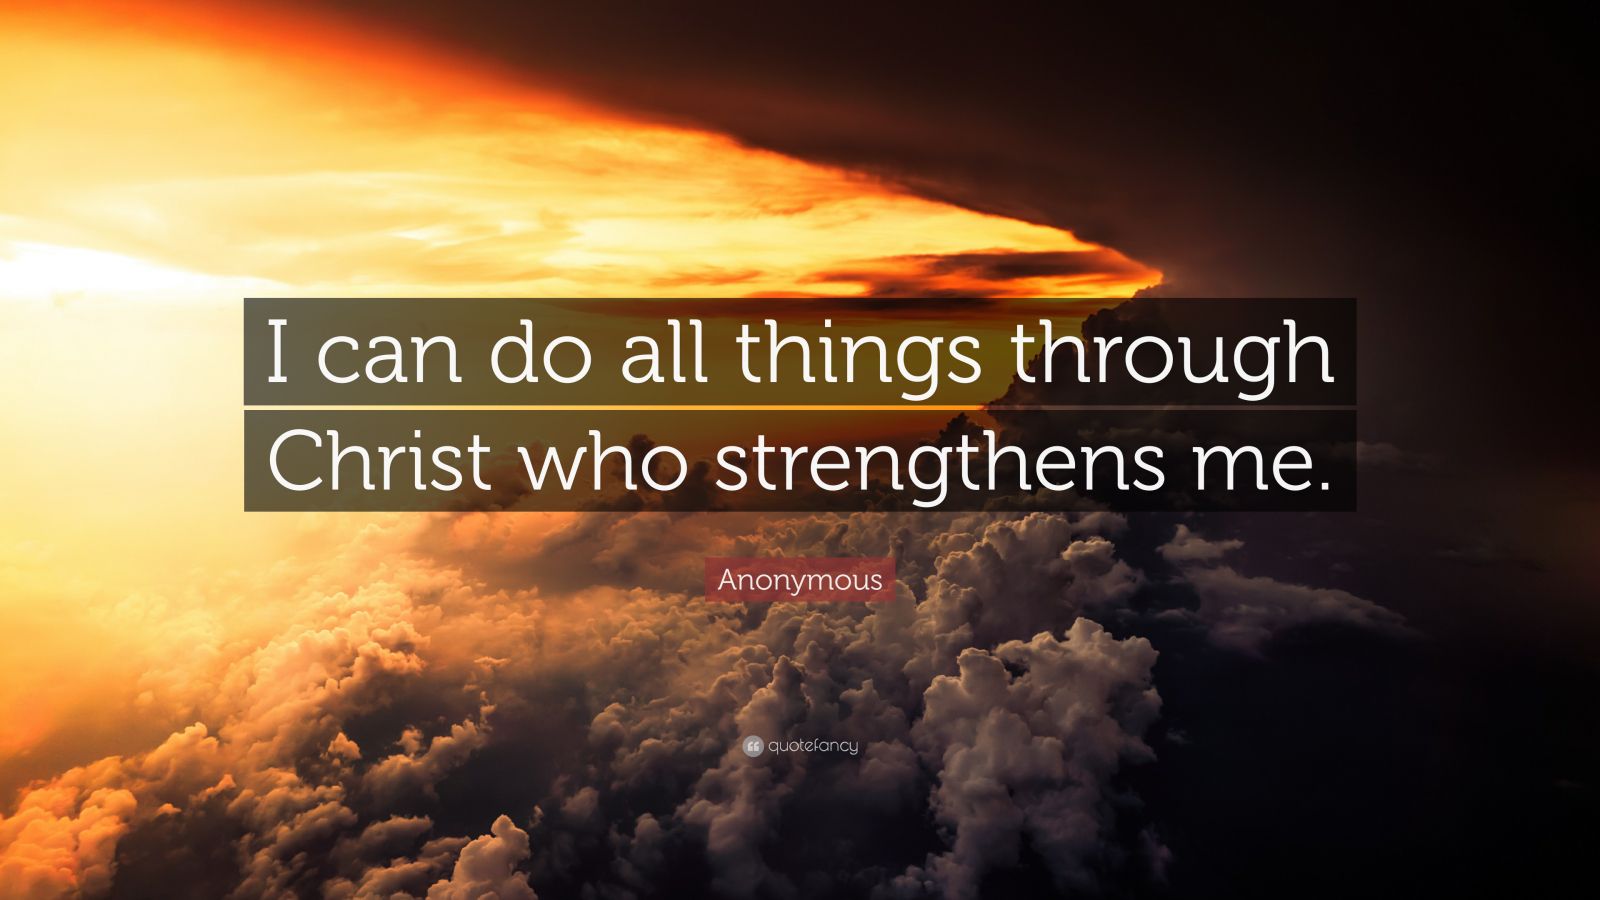 I Can Do This For Hours Anonymous Quote: “I can do all things through Christ who strengthens me